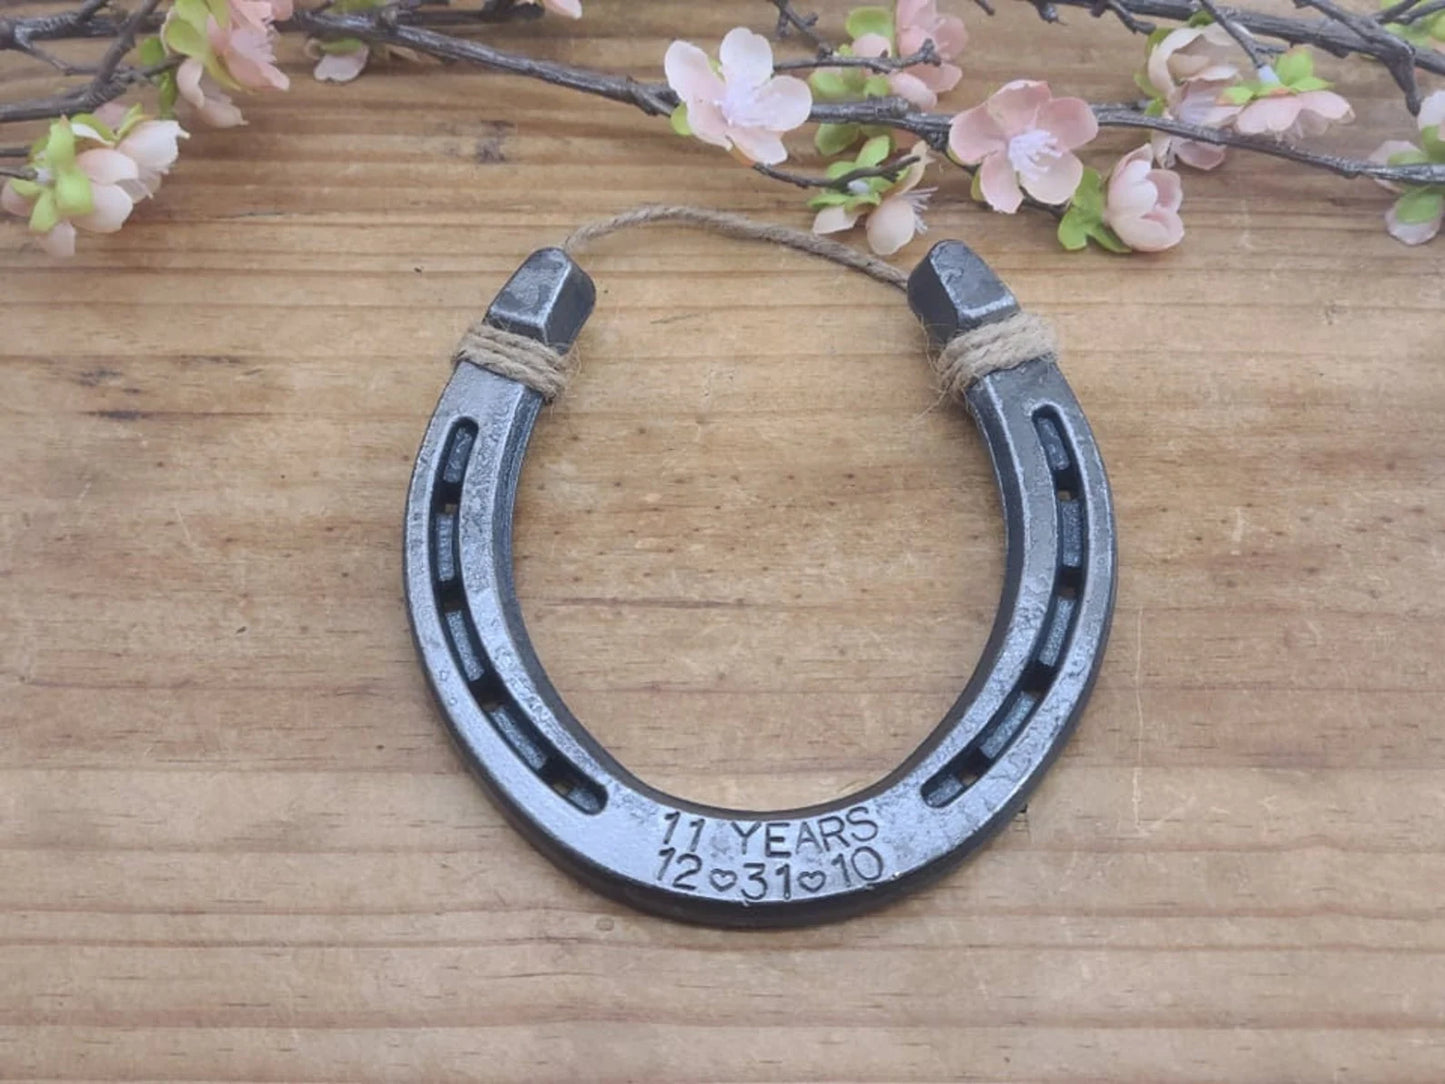 Horseshoe wall decor personalized with wedding date for 11 year anniversary